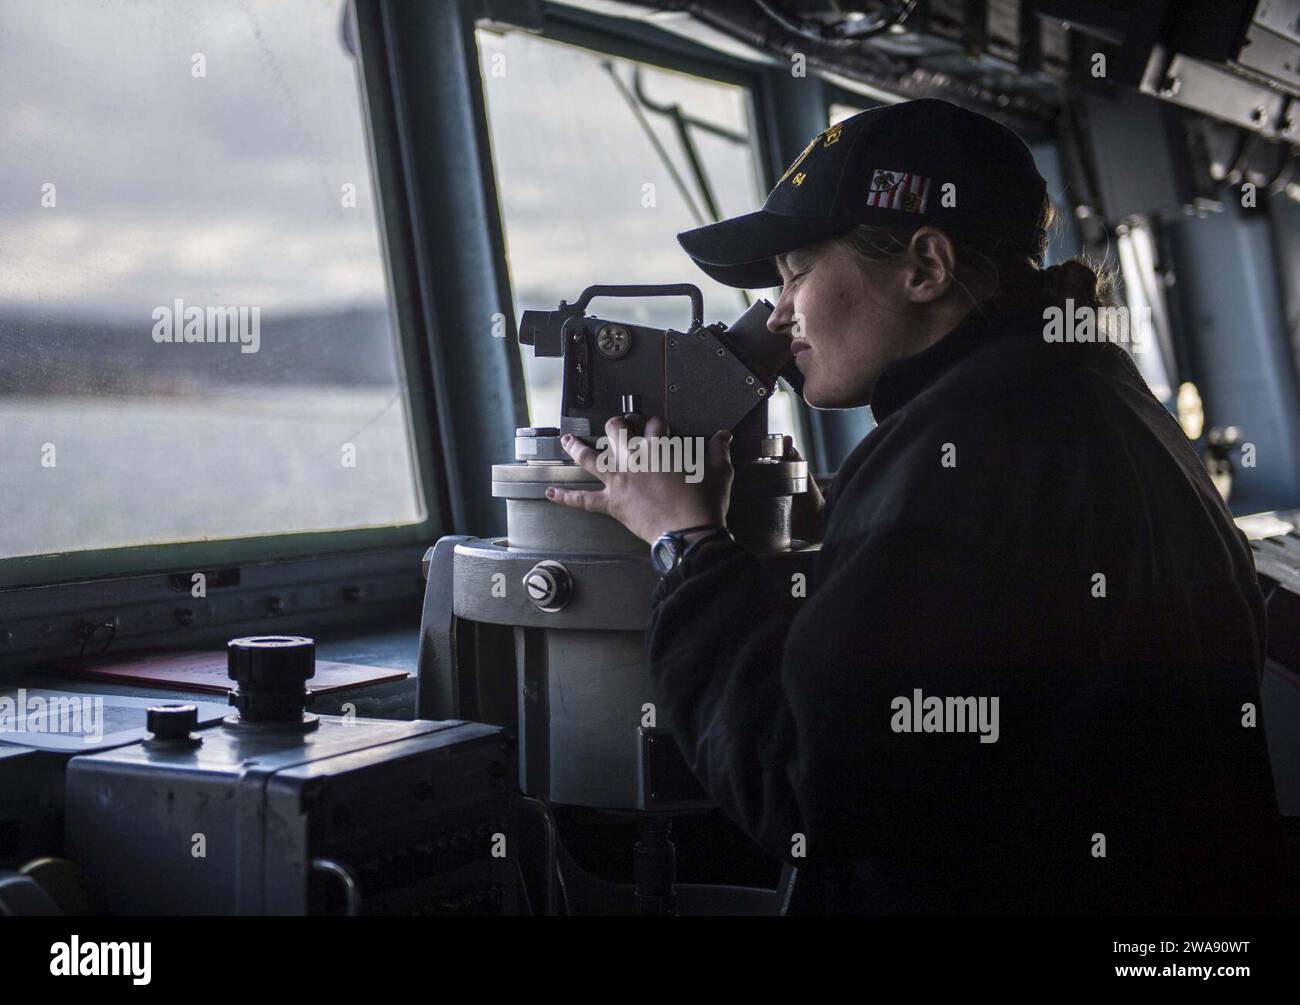 US military forces. 180217KA046-0084  DARDANELLES STRAIT (Feb. 17, 2018) Р Ensign Bridget Kennedy uses a telescopic alidade during watch on the bridge aboard the Arleigh Burke-class guided-missile destroyer USS Carney (DDG 64), as the ship transits the Dardanelles Straits, Feb, 17, 2018. Carney, forward-deployed to Rota, Spain, is on its fourth patrol in the U.S. 6th Fleet area of operations in support of regional allies and partners, and U.S. national security interests in Europe. (U.S. Navy photo by Mass Communication Specialist 2nd Class James R. Turner/Released) Stock Photo